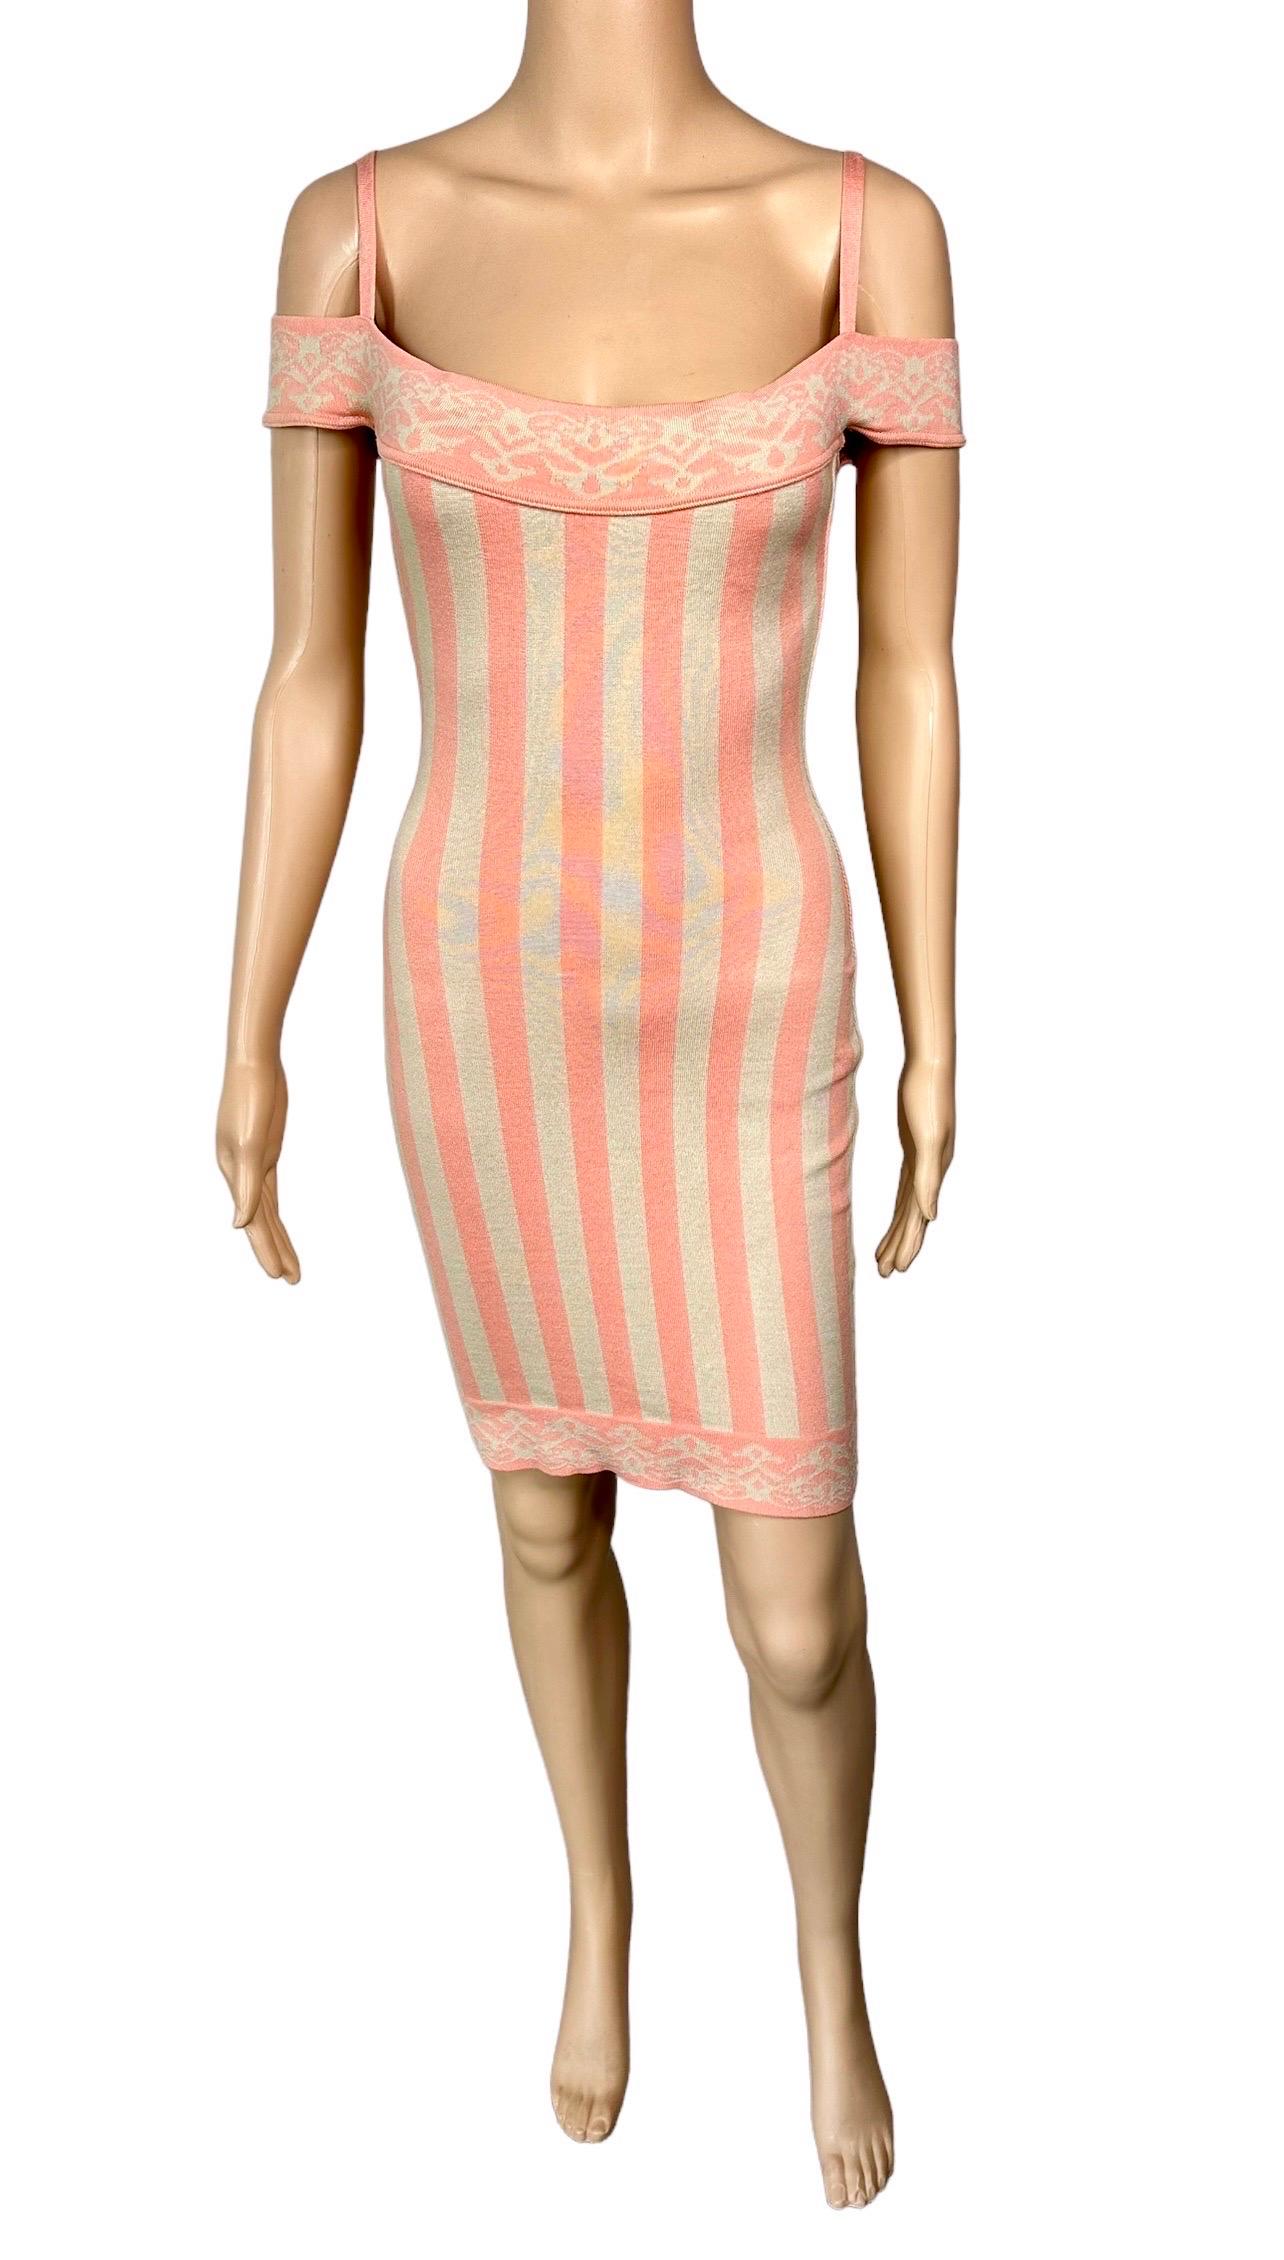 Azzedine Alaia S/S 1992 Vintage Cold-Shoulder Striped Bodycon Mini Dress Size S

Alaïa cold-shoulder bodycon dress with striped print throughout, squared neckline, short sleeves and concealed zip closure at back.
